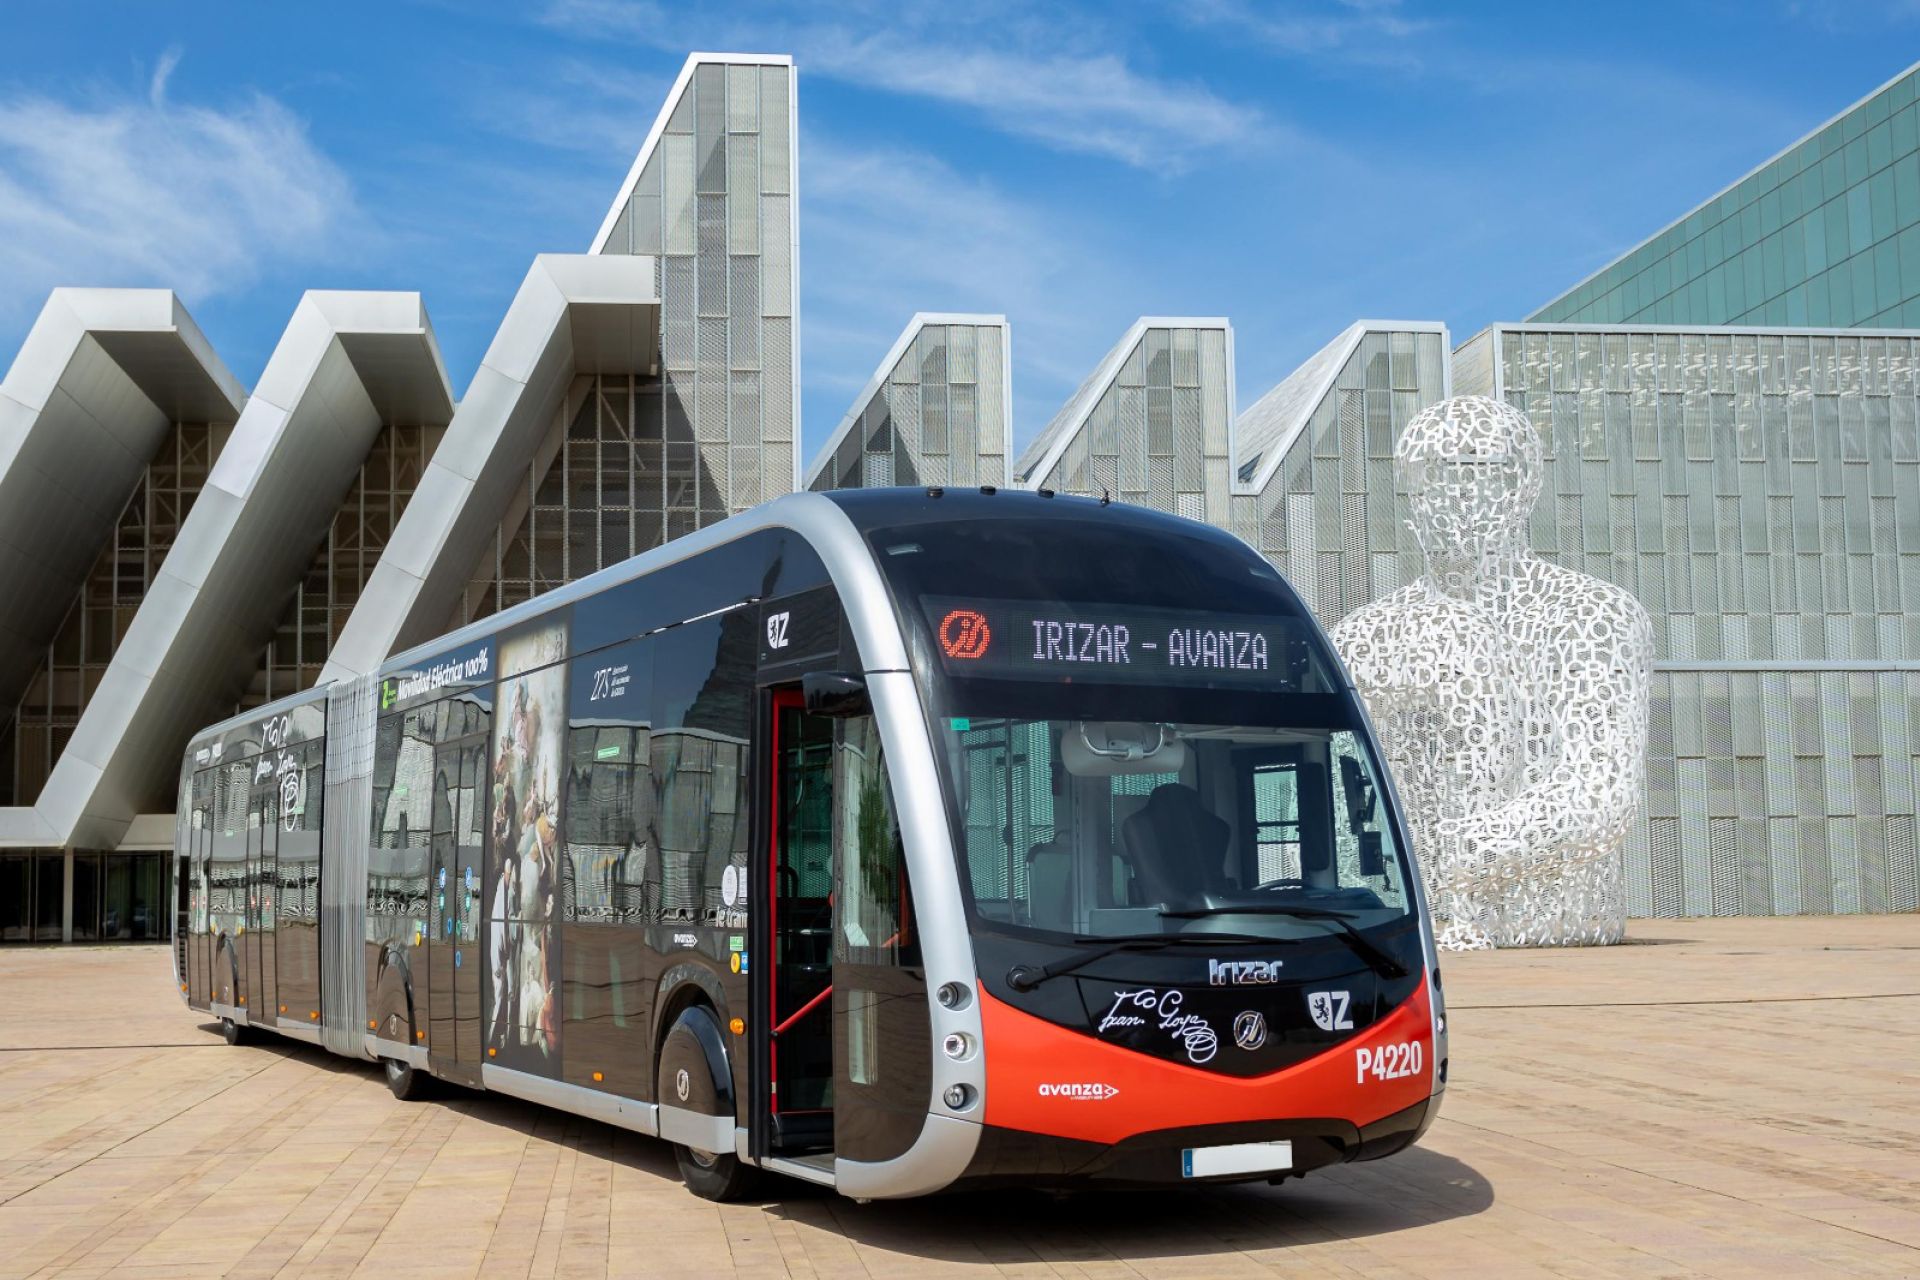 Zaragoza City Council and Avanza are committing to Irizar e-mobility electric buses to renew their fleet